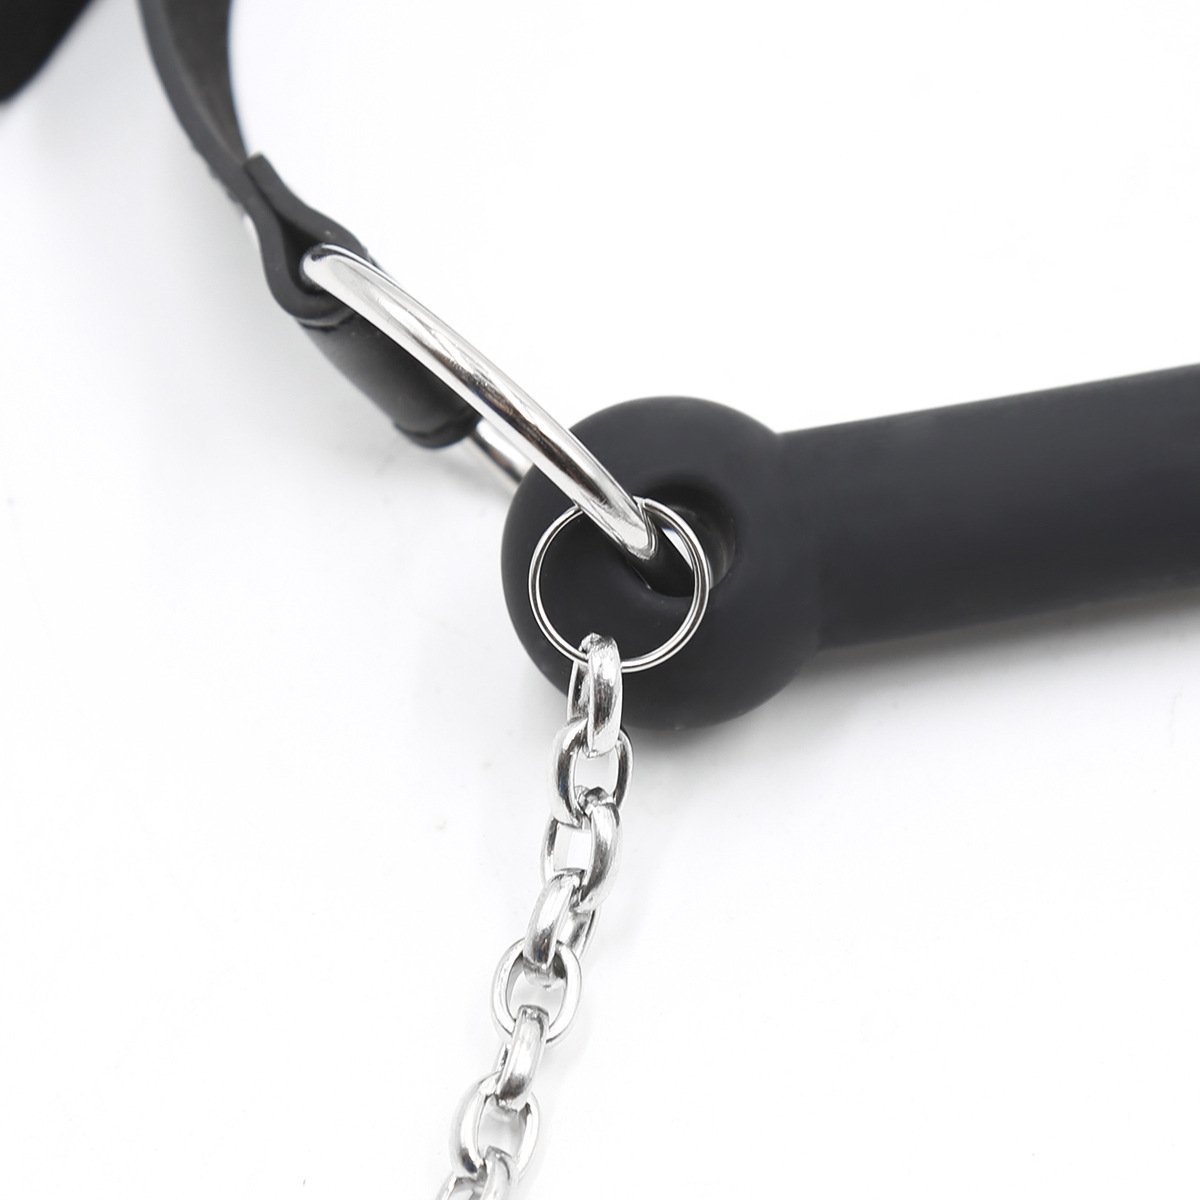 Black Dog Bone Stopper with Traction Chain - lovemesexBlindfolds, Masks and Gags